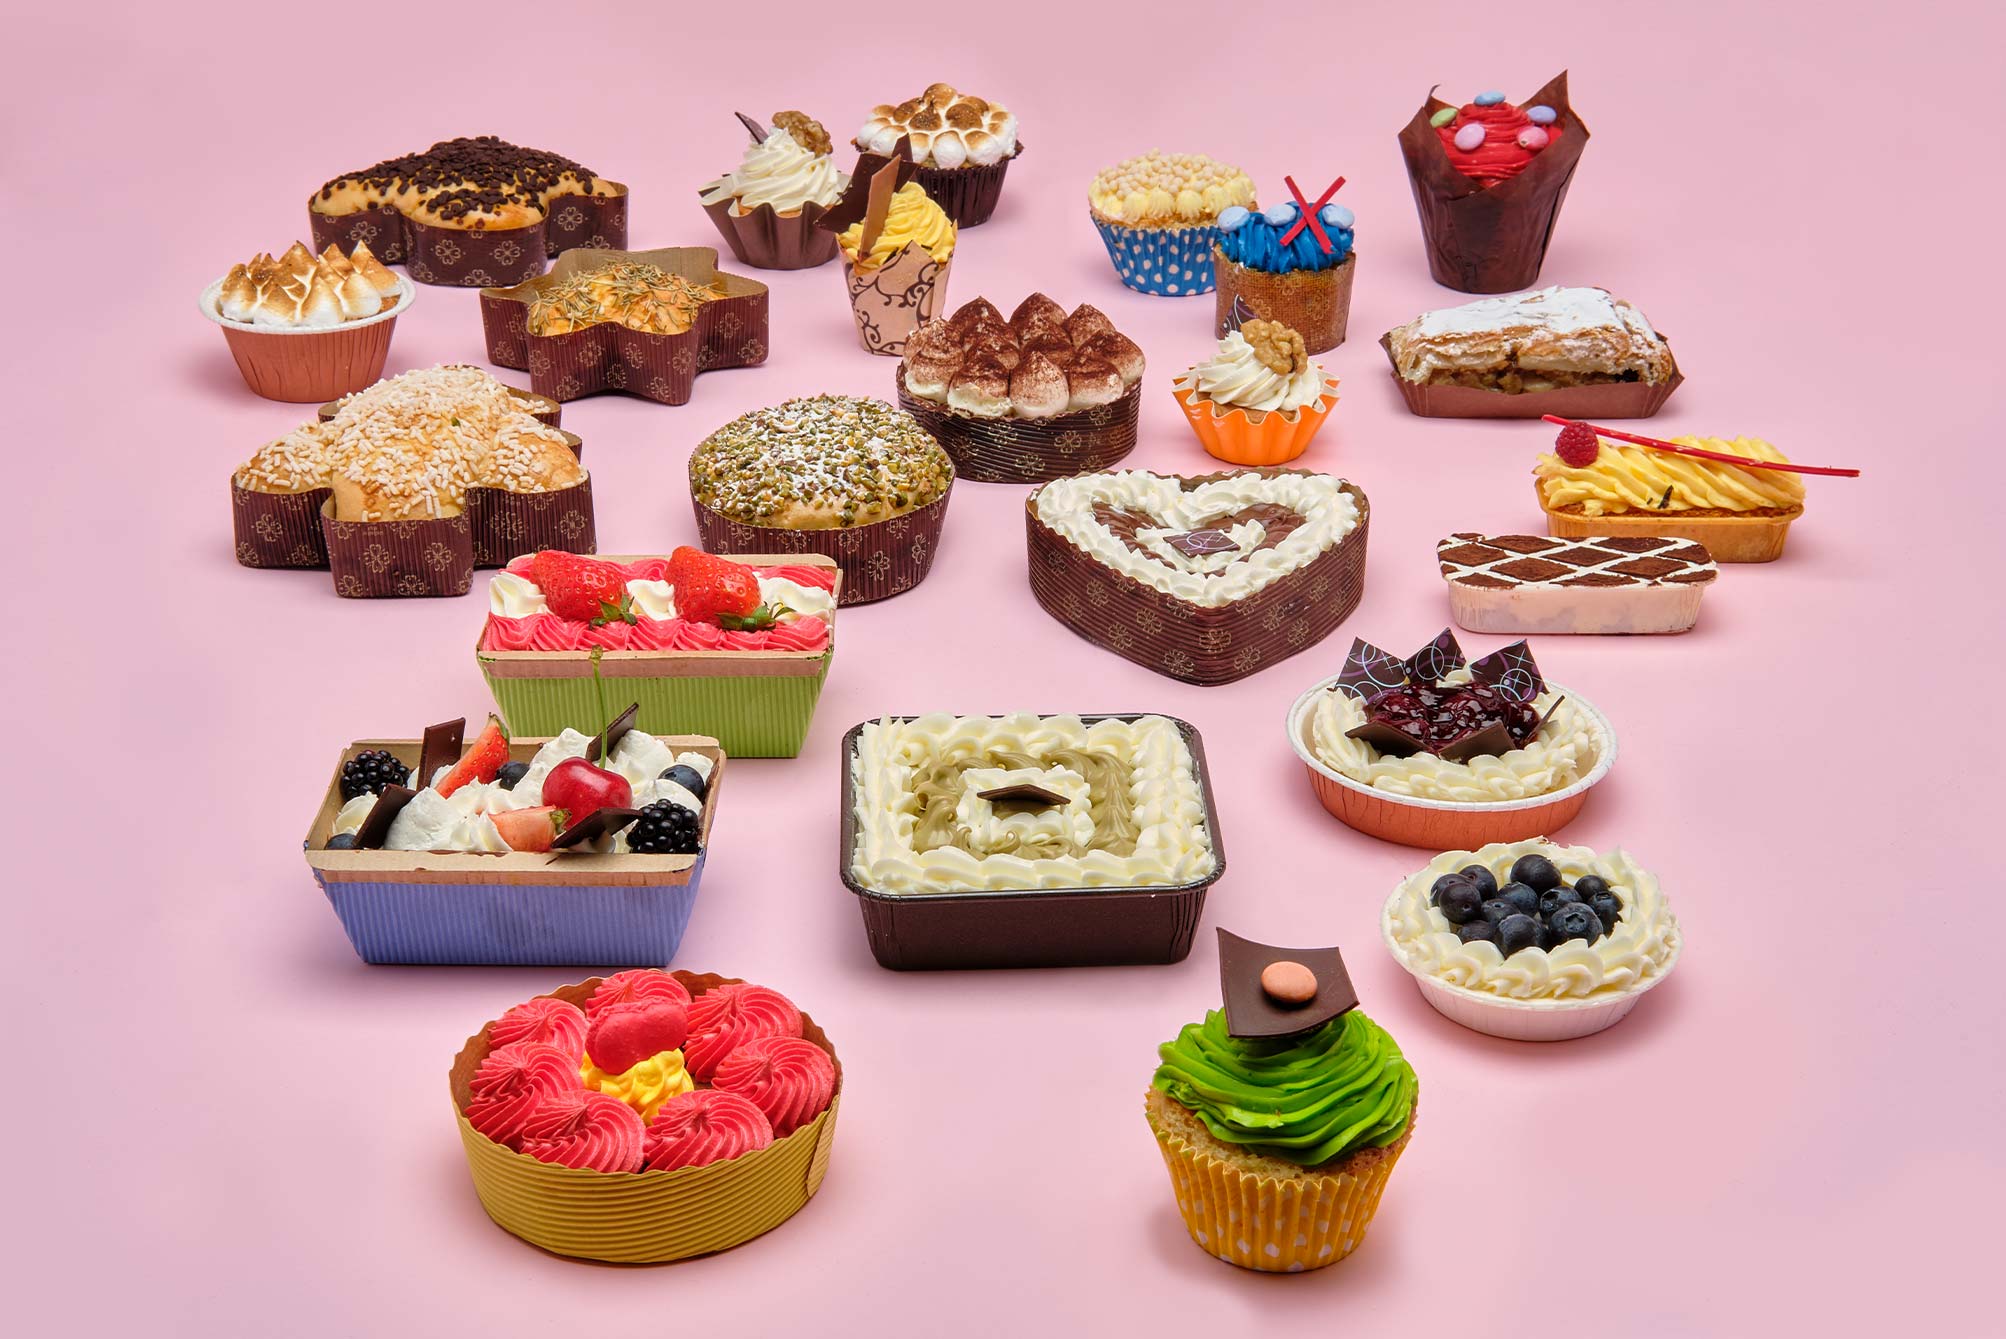 Novacart products for food and bakery